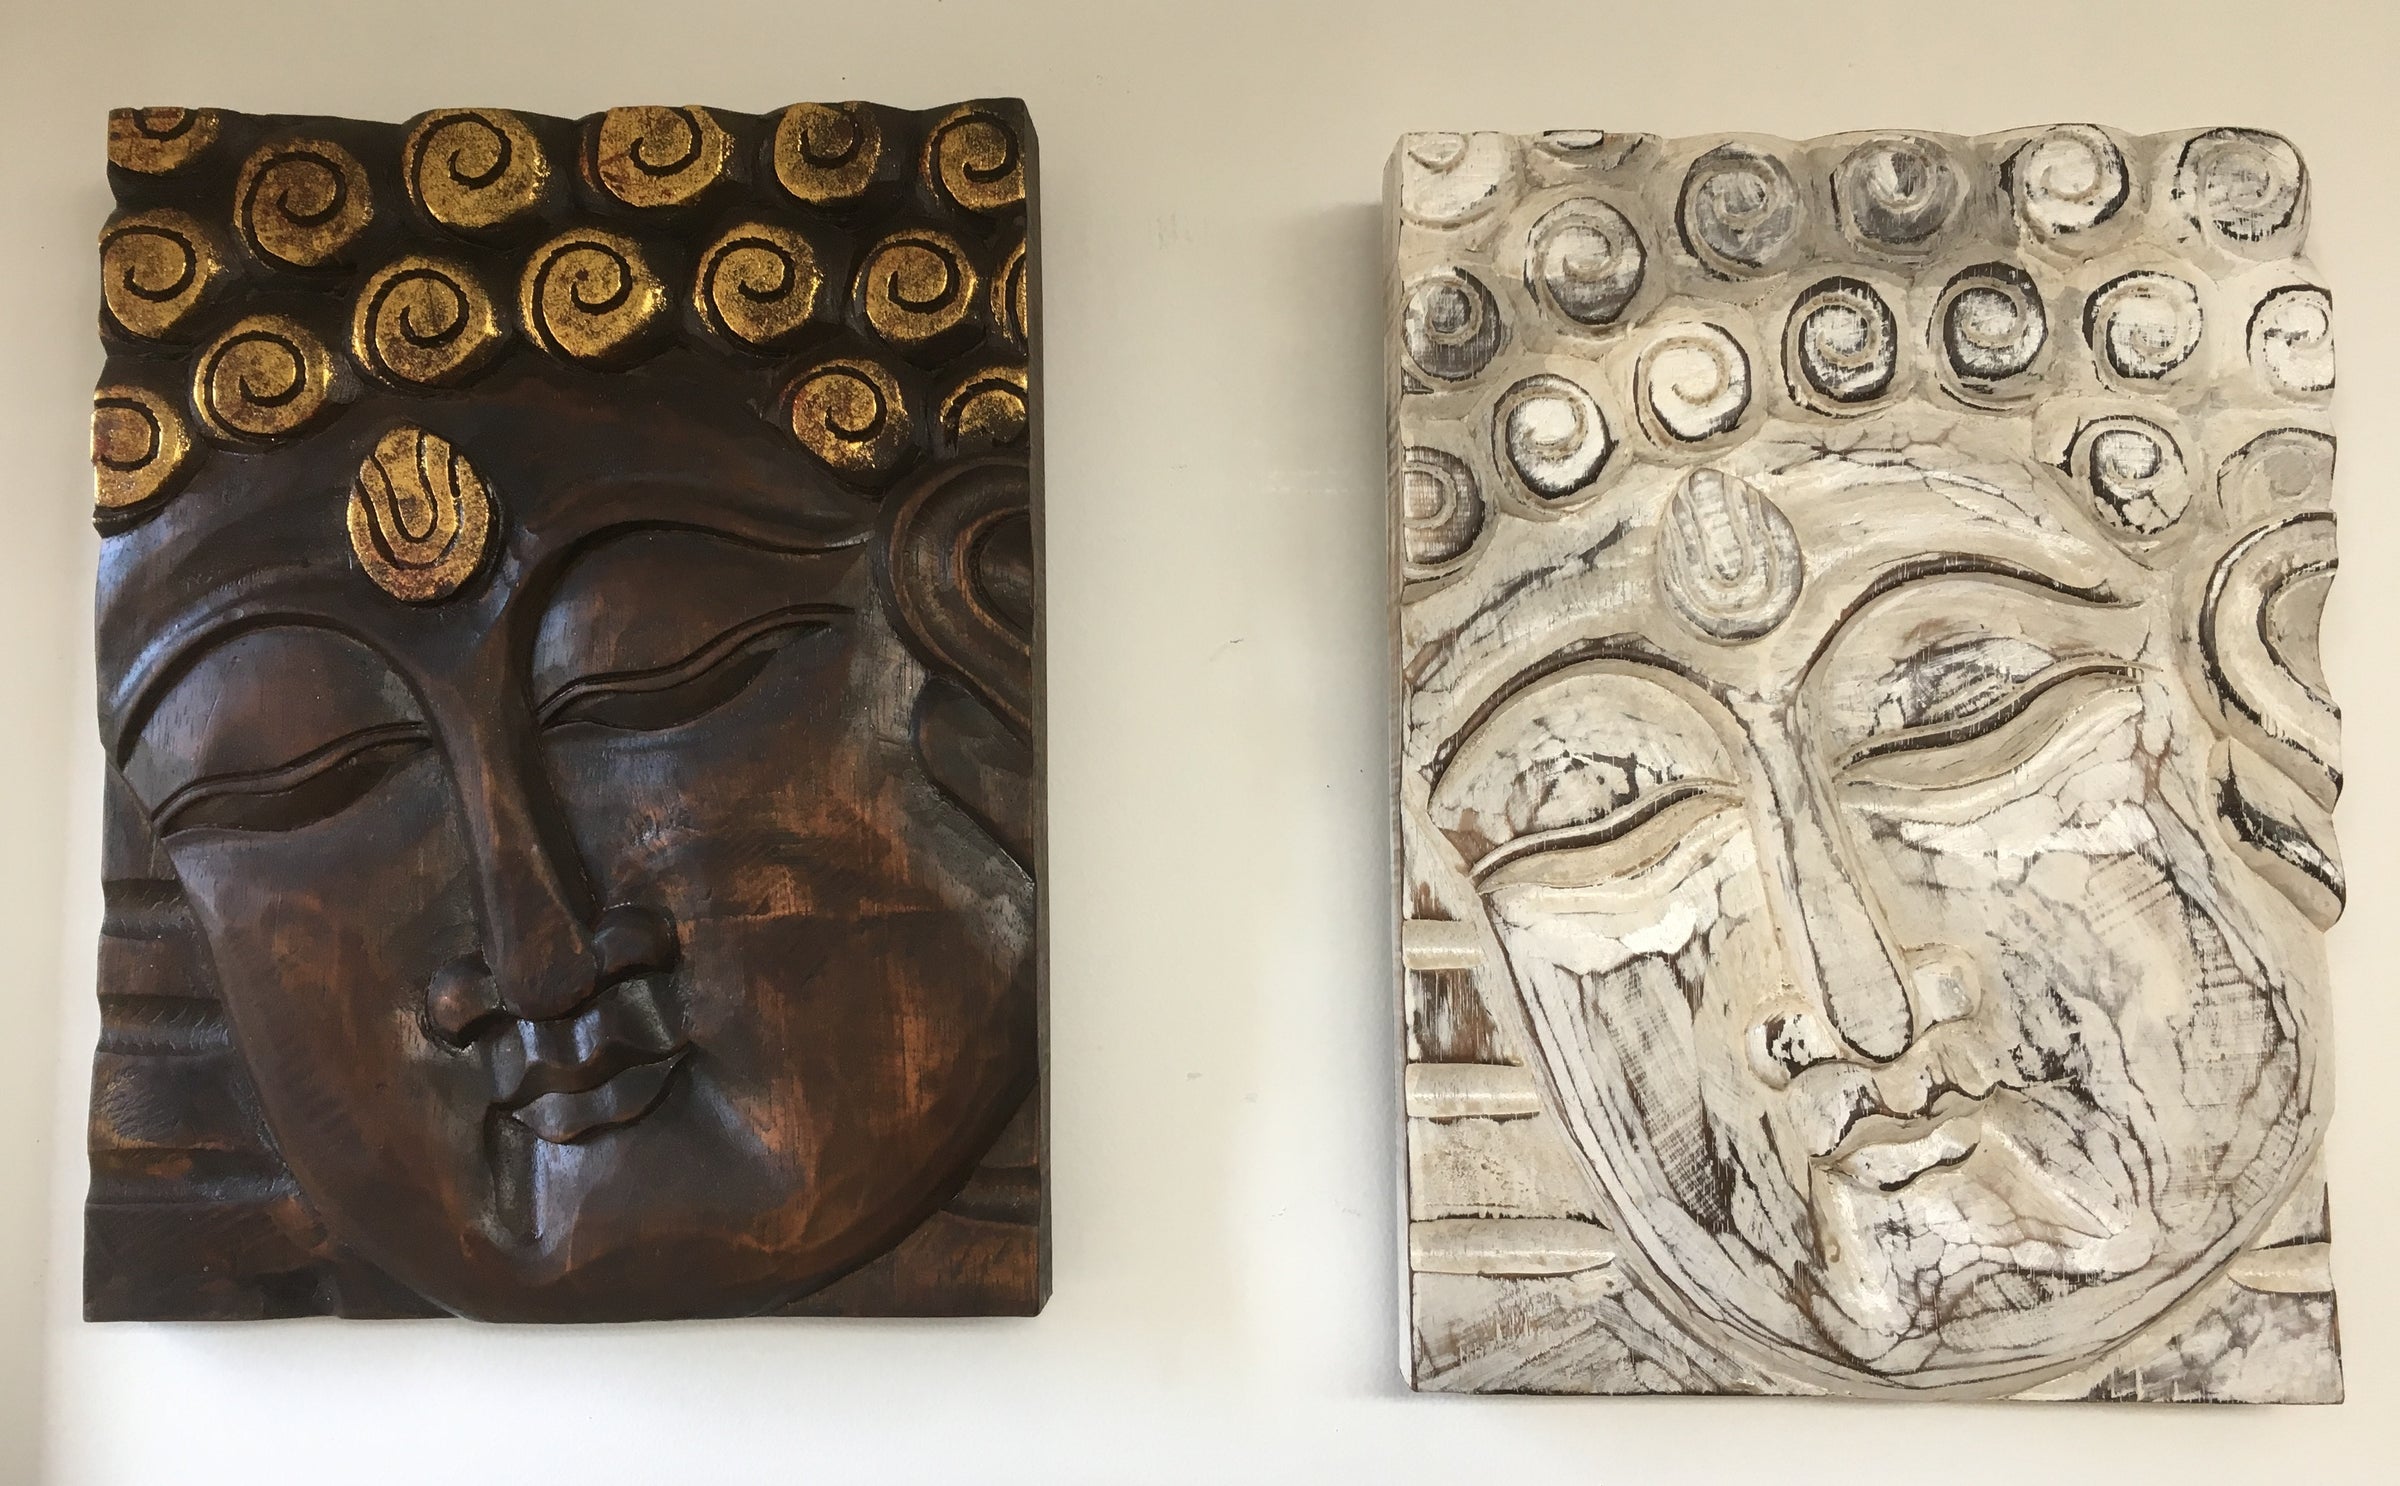 Balinese Buddha Face Solid Wood Carving Plaque